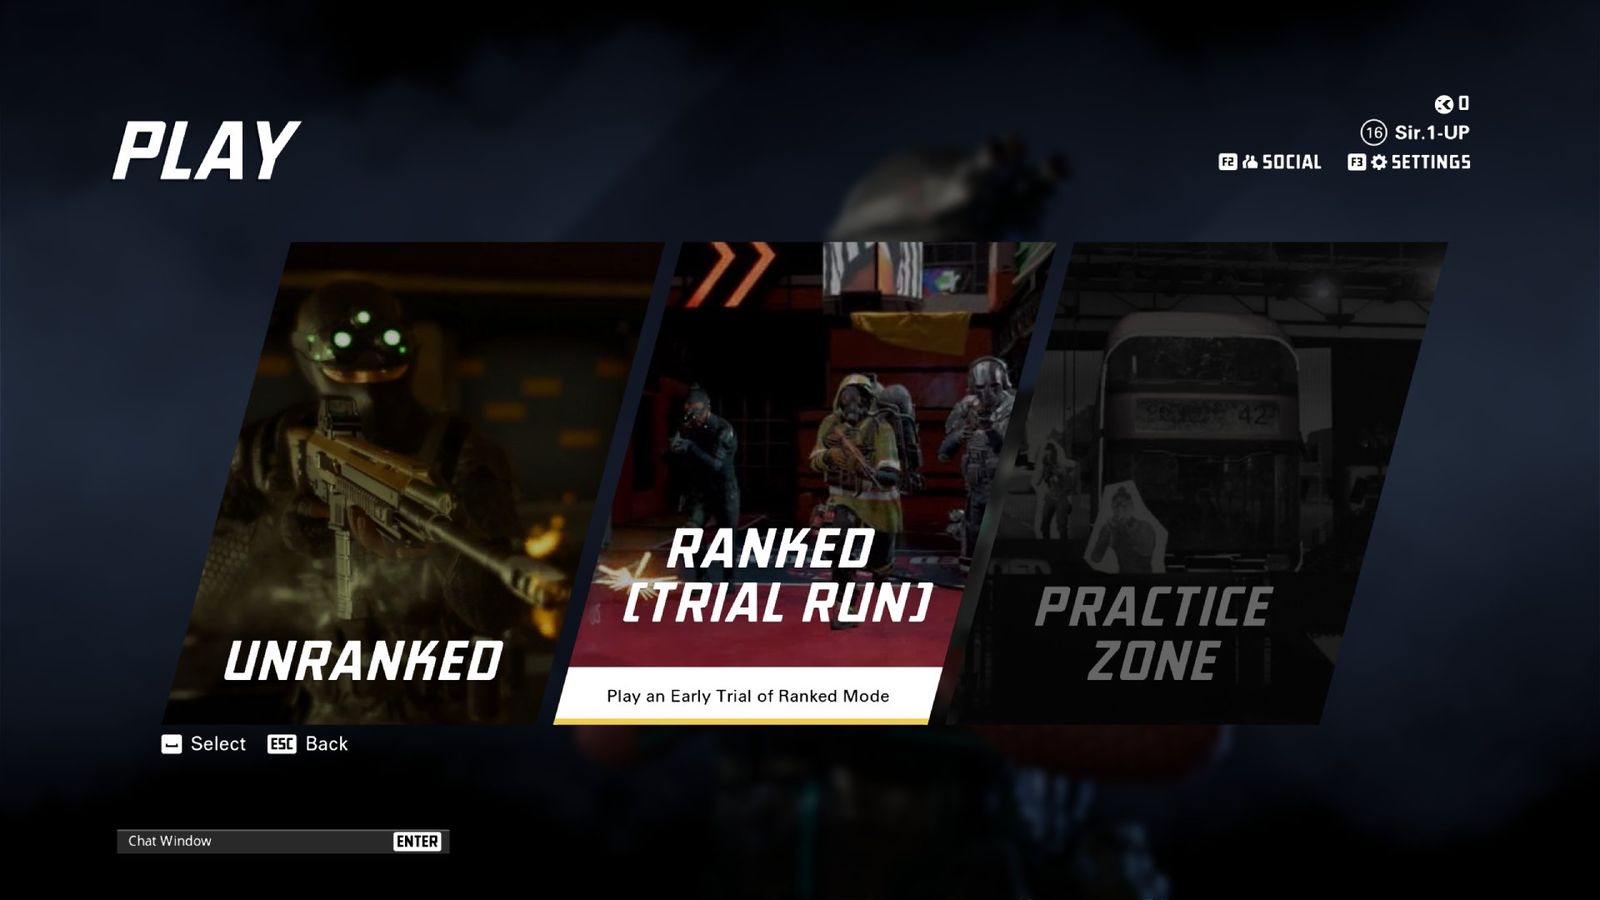 A screenshot of the multiplayer playlists in XDefiant, including the Ranked Trial Run option at the center.